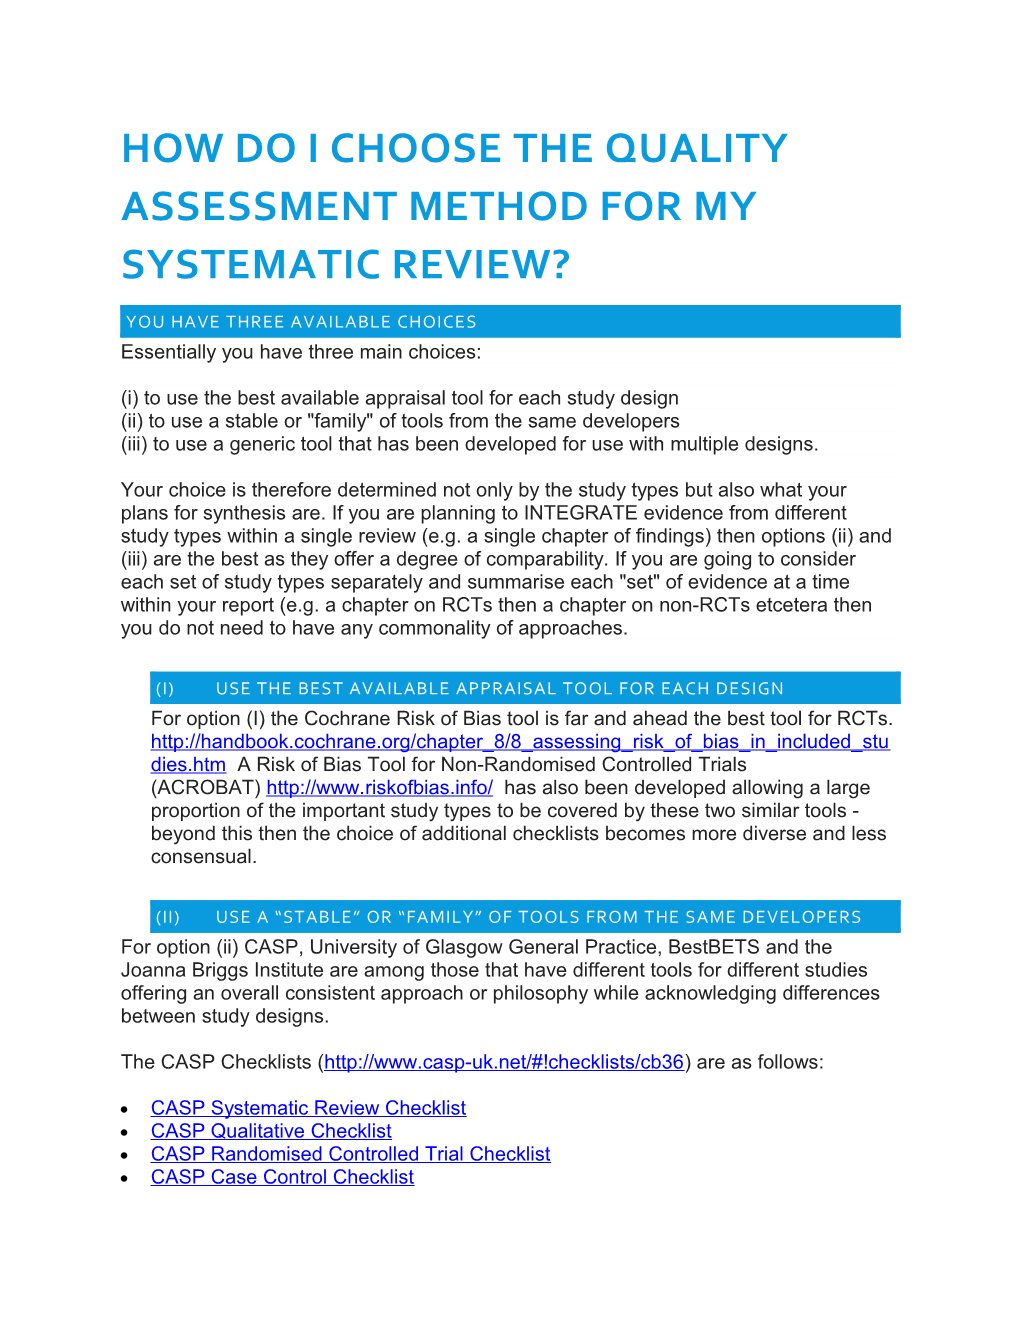 How Do I Choose the Quality Assessment Method for My Systematic Review?